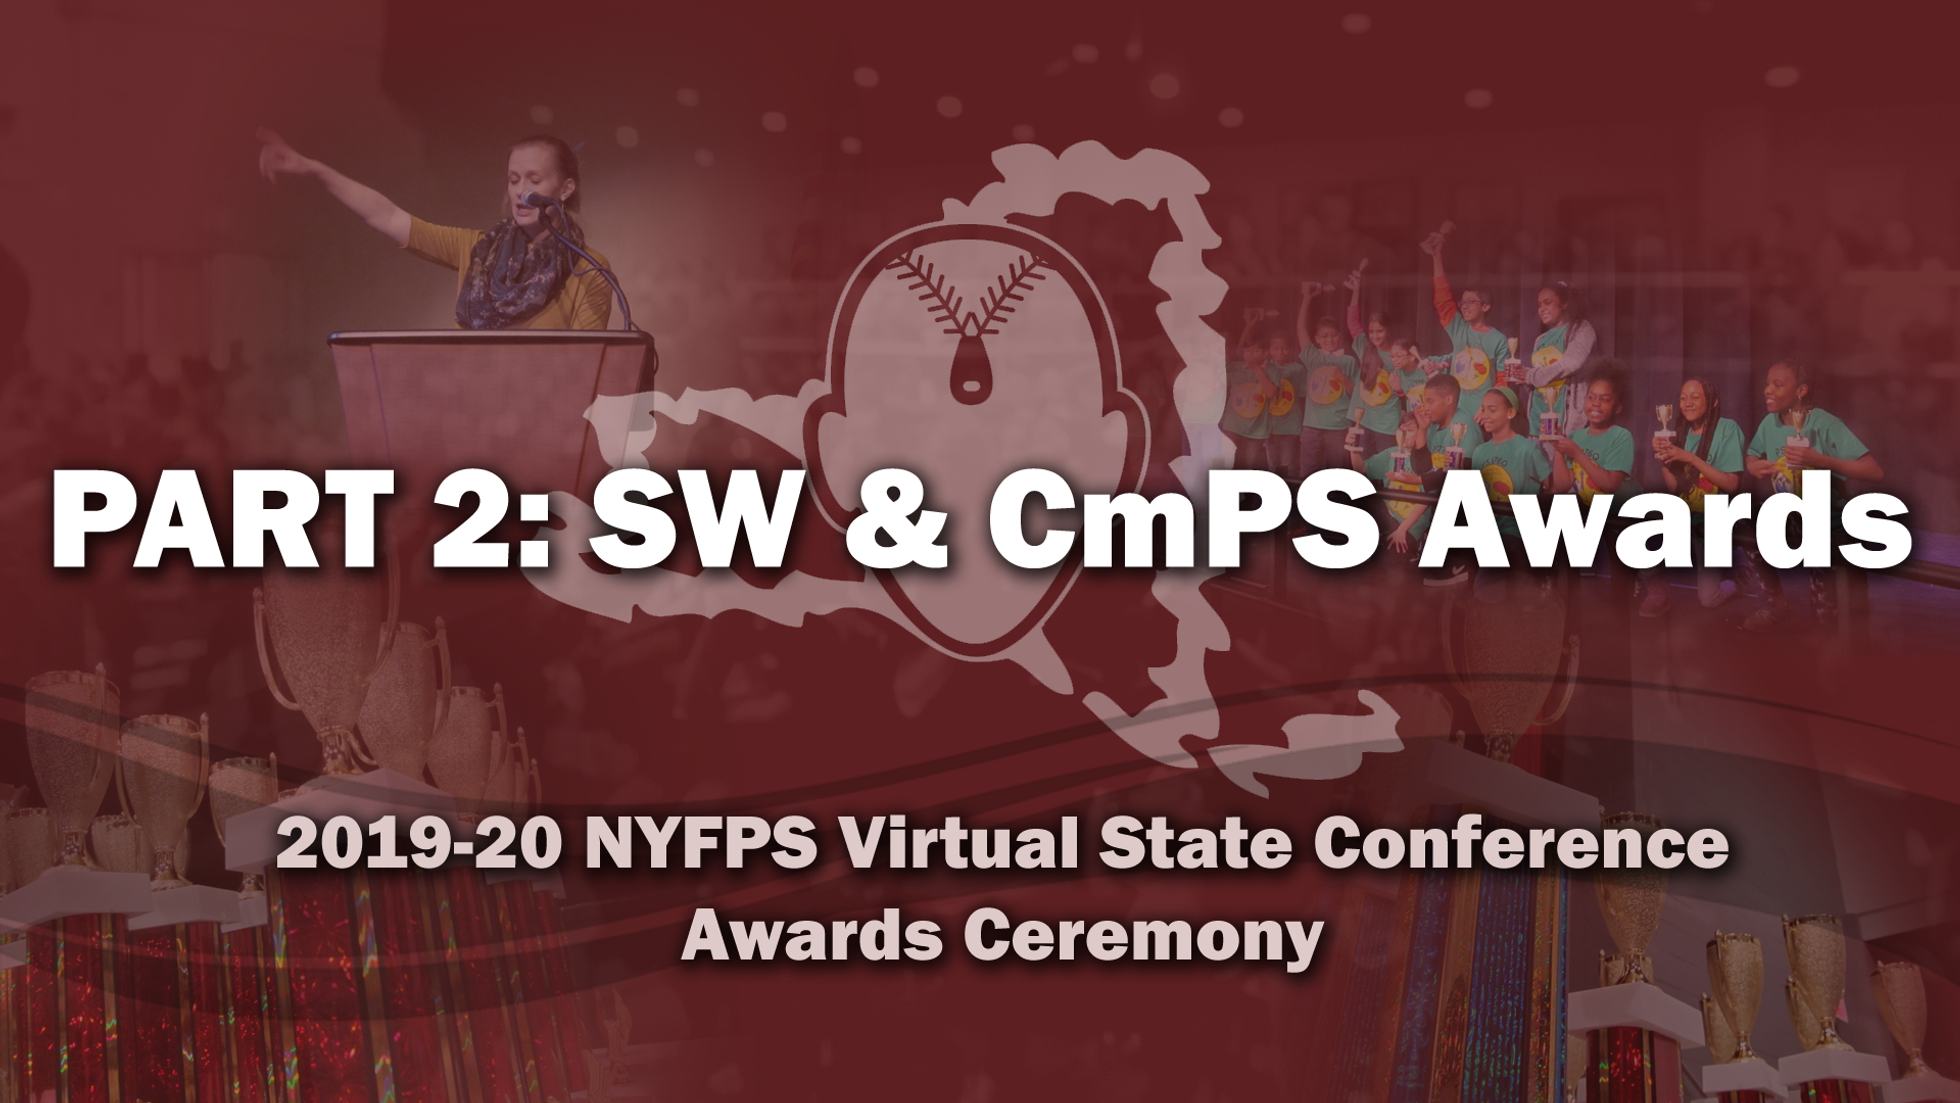 NYFPS Virtual State Bowl - SW & CmPS Awards